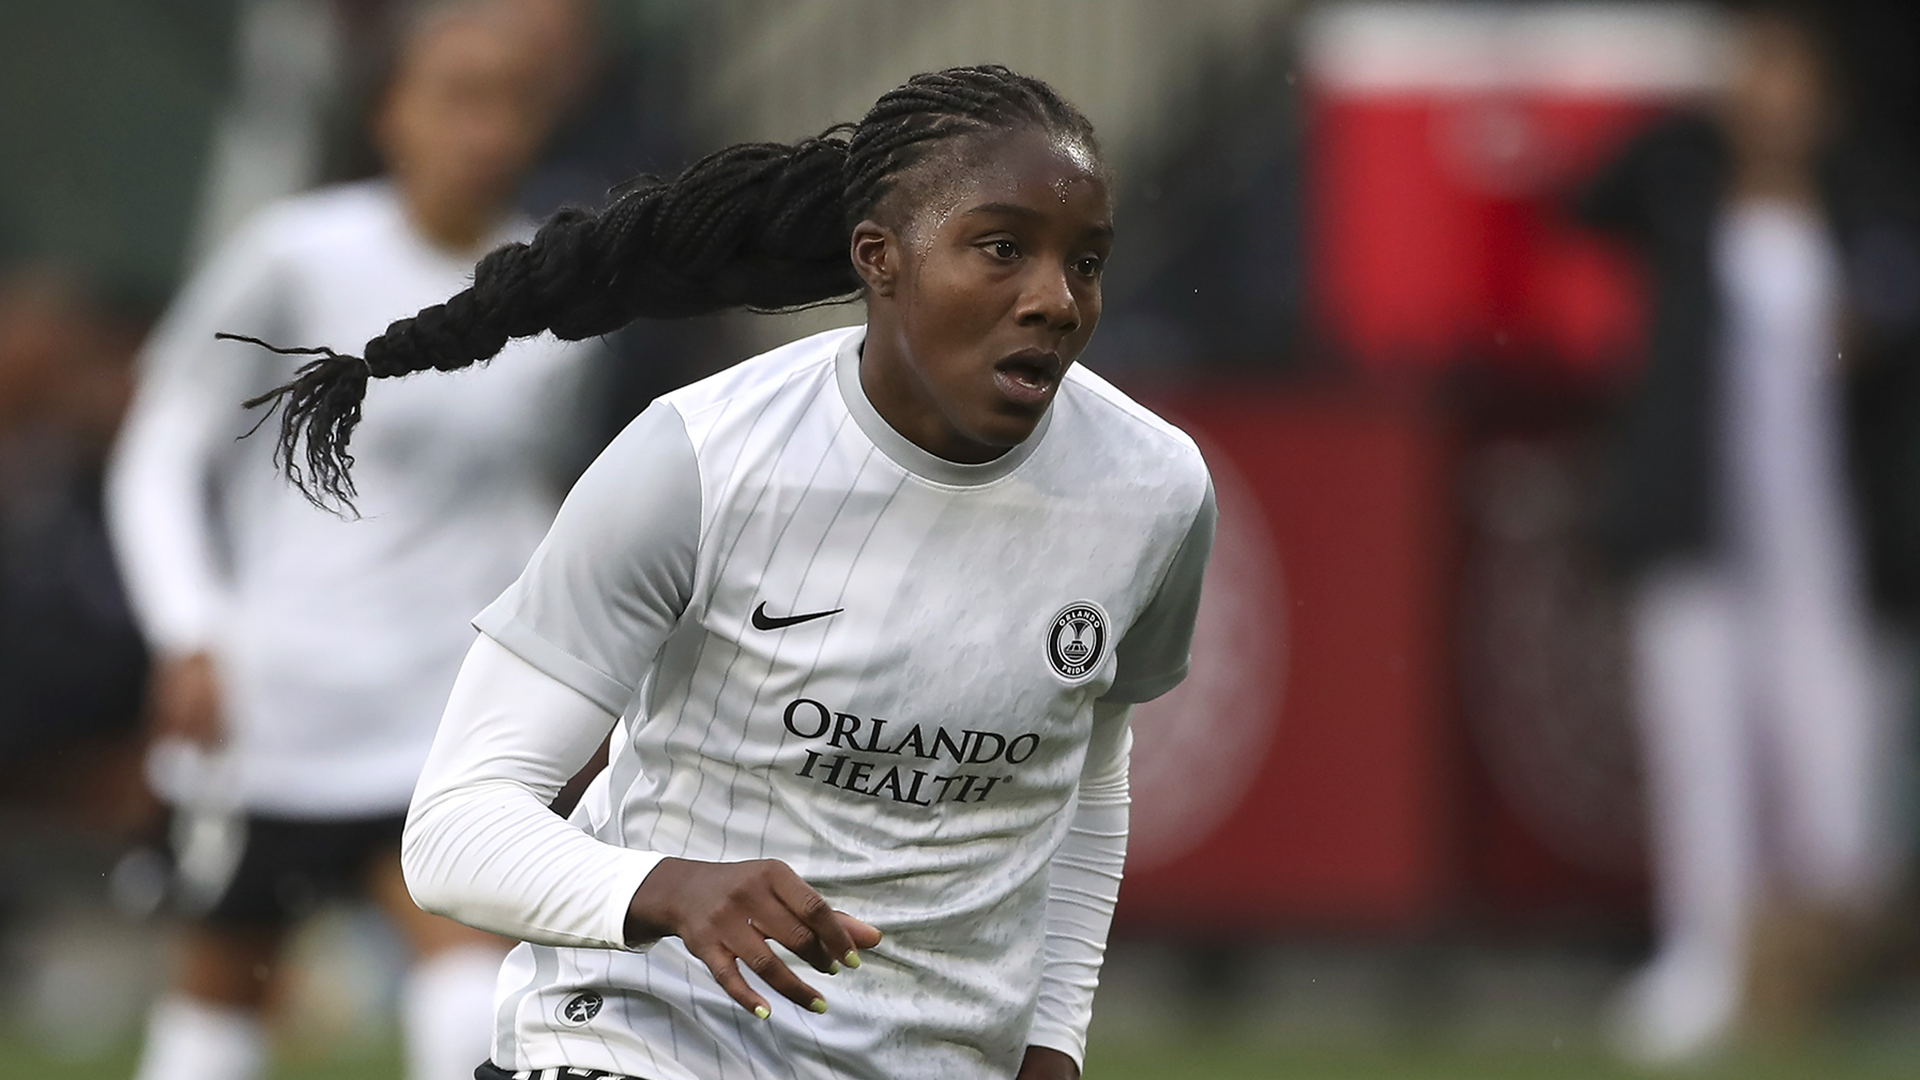 Portland Thorns 1, San Diego Wave FC 0 in NWSL Challenge Cup: Live